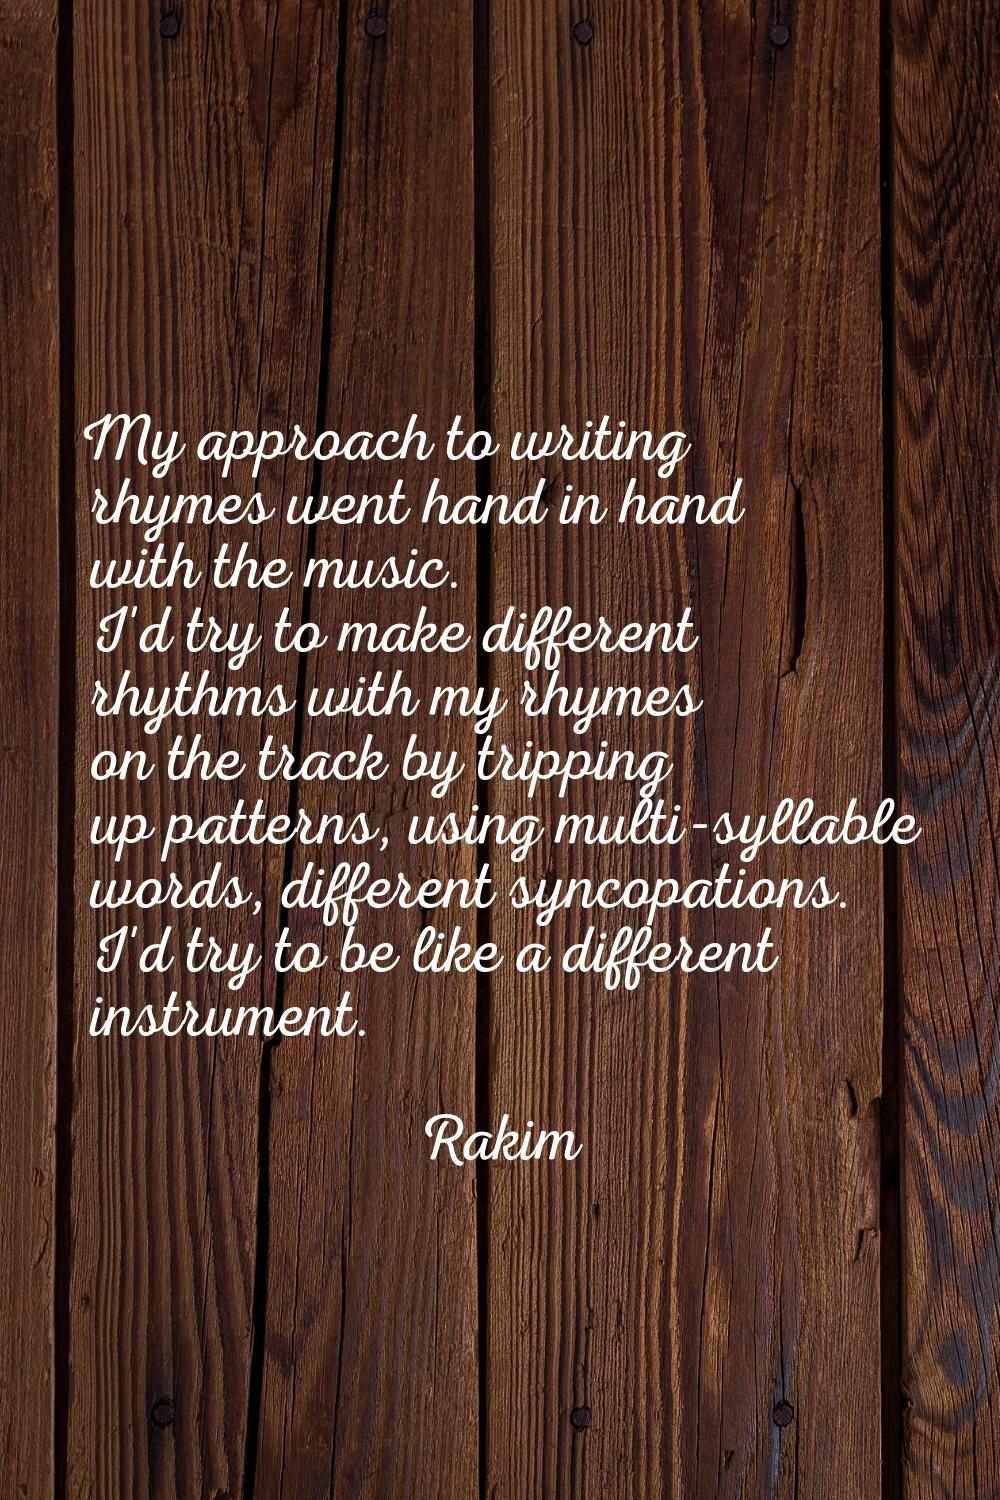 My approach to writing rhymes went hand in hand with the music. I'd try to make different rhythms w